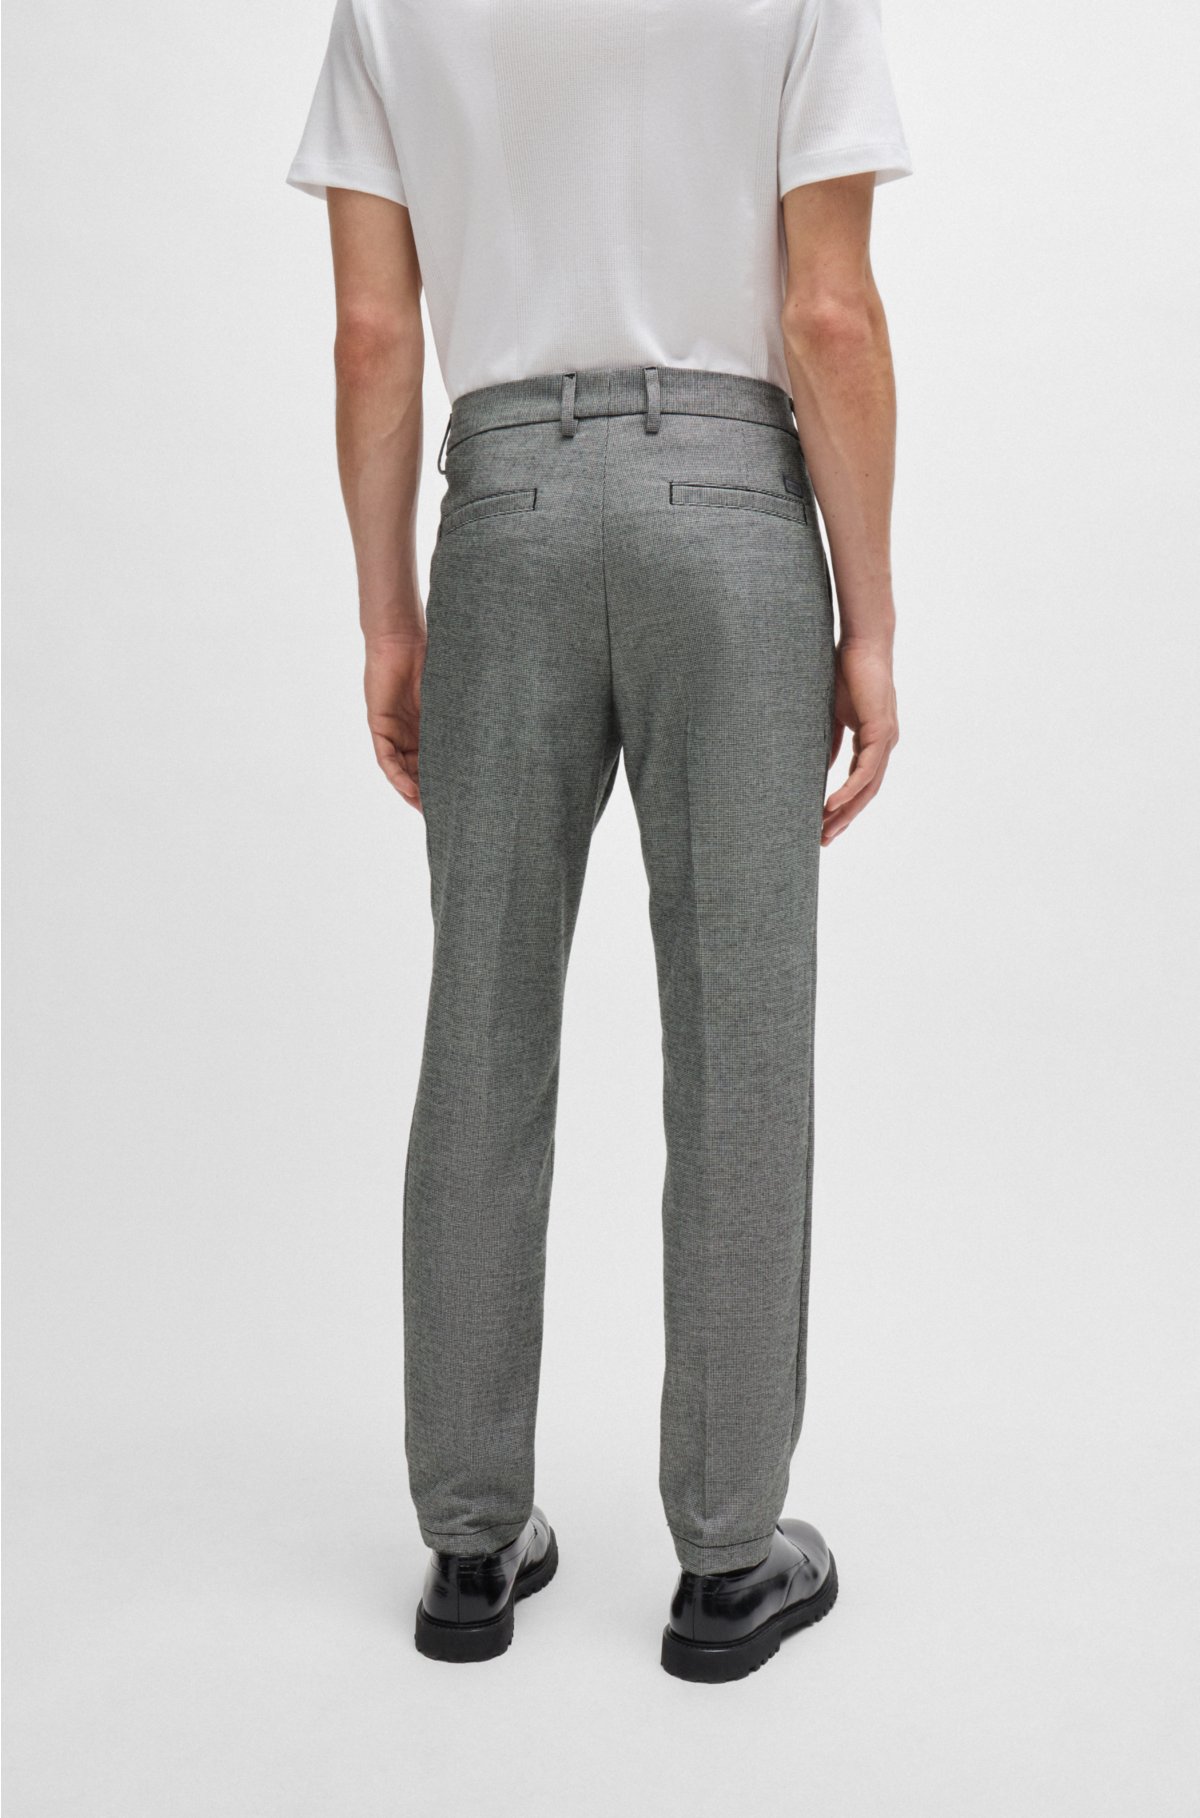 Regular-fit trousers in micro-check material, Black Patterned